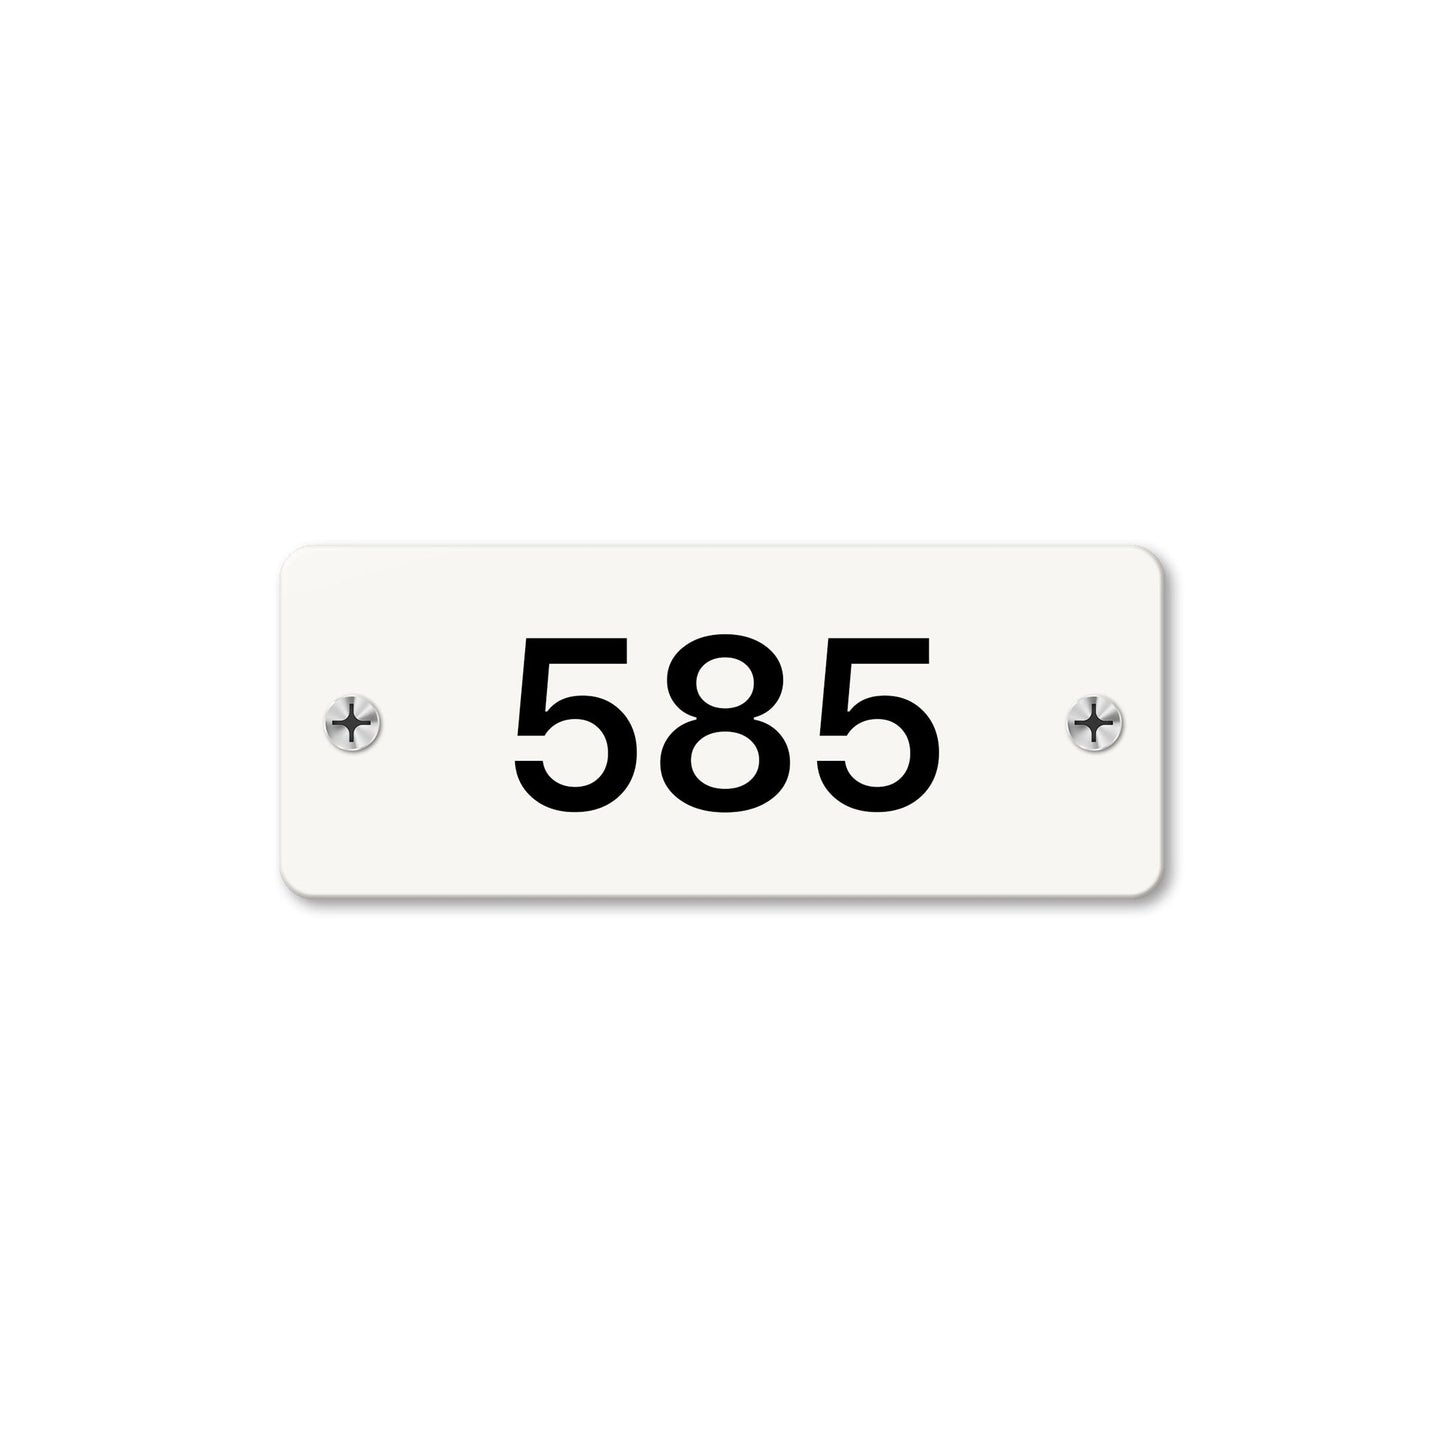 Numeral 585